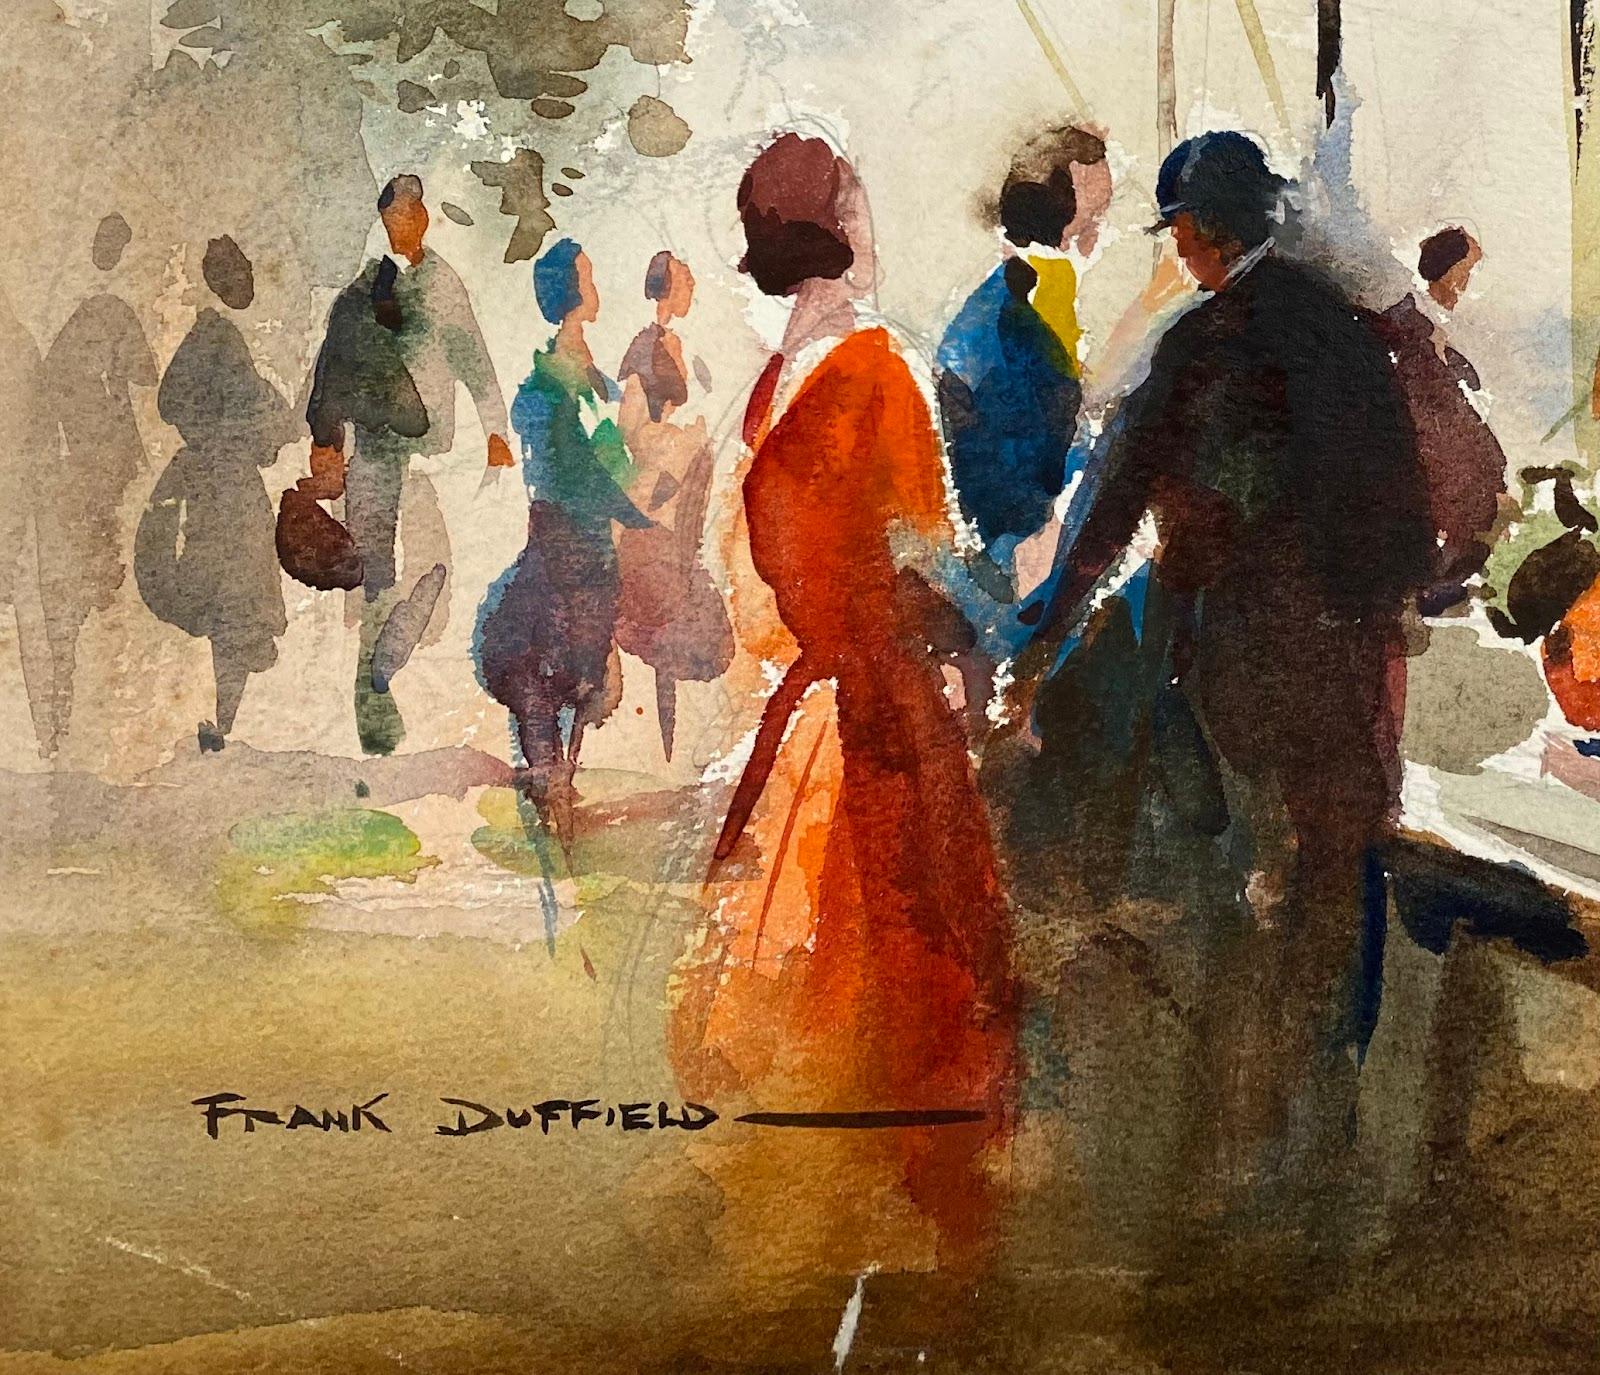 British Mid 20th Century Impressionist Painting Figures At Antique Market  - Art by Frank Duffield